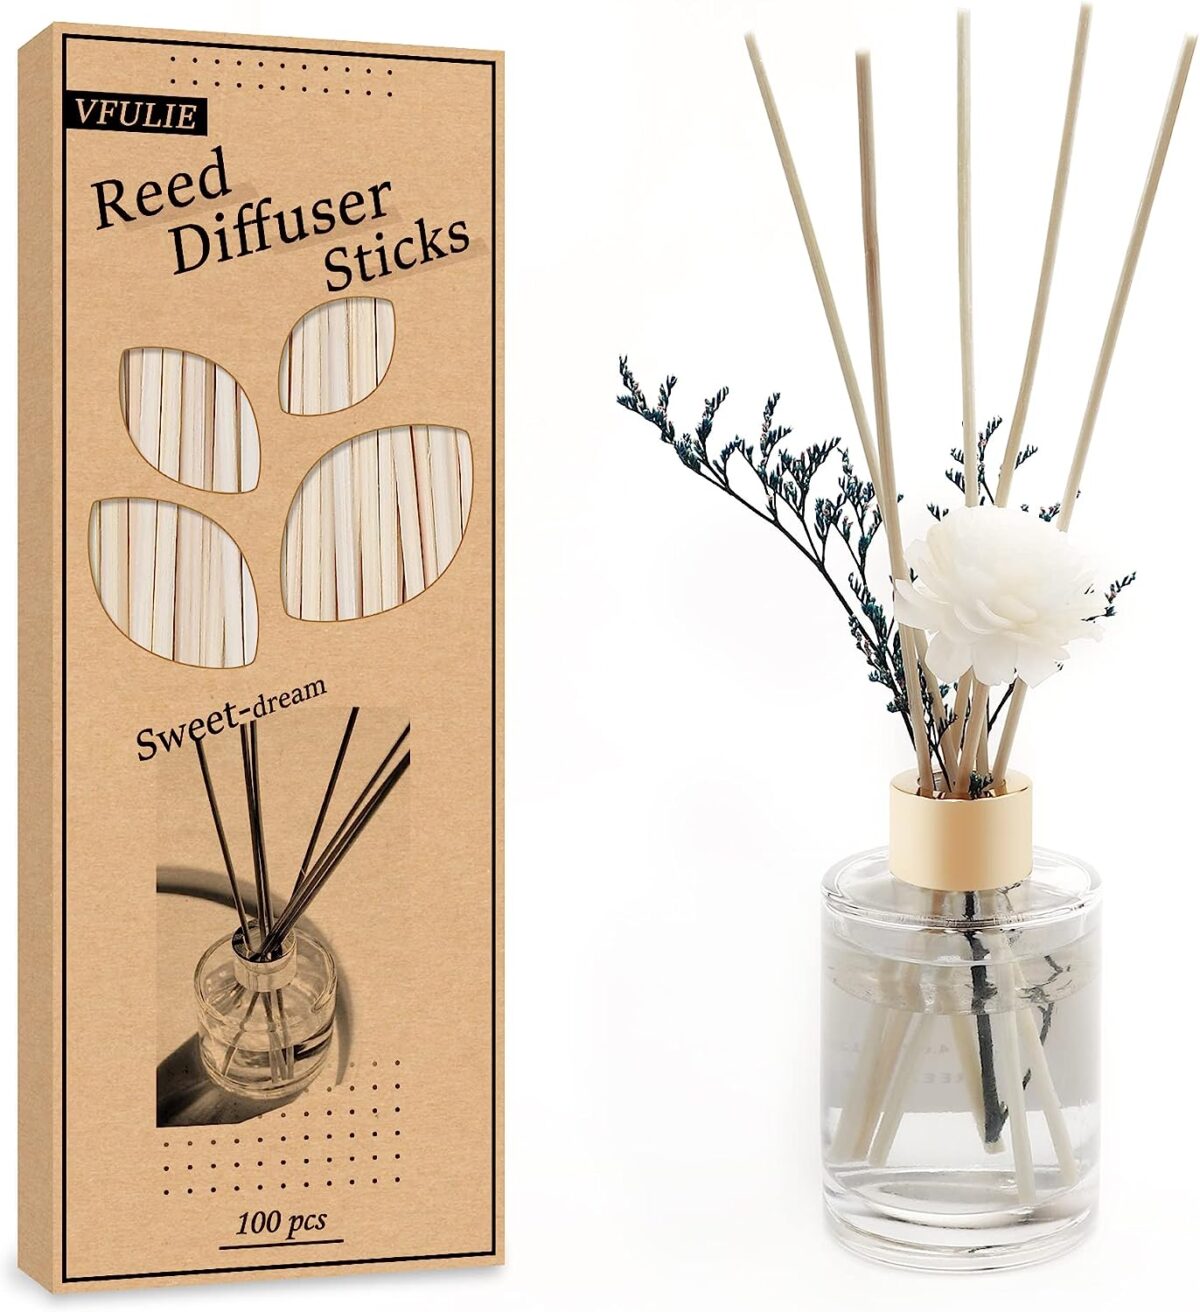 Home decor, Reed Diffuser, Wood Reed Diffuser Sticks